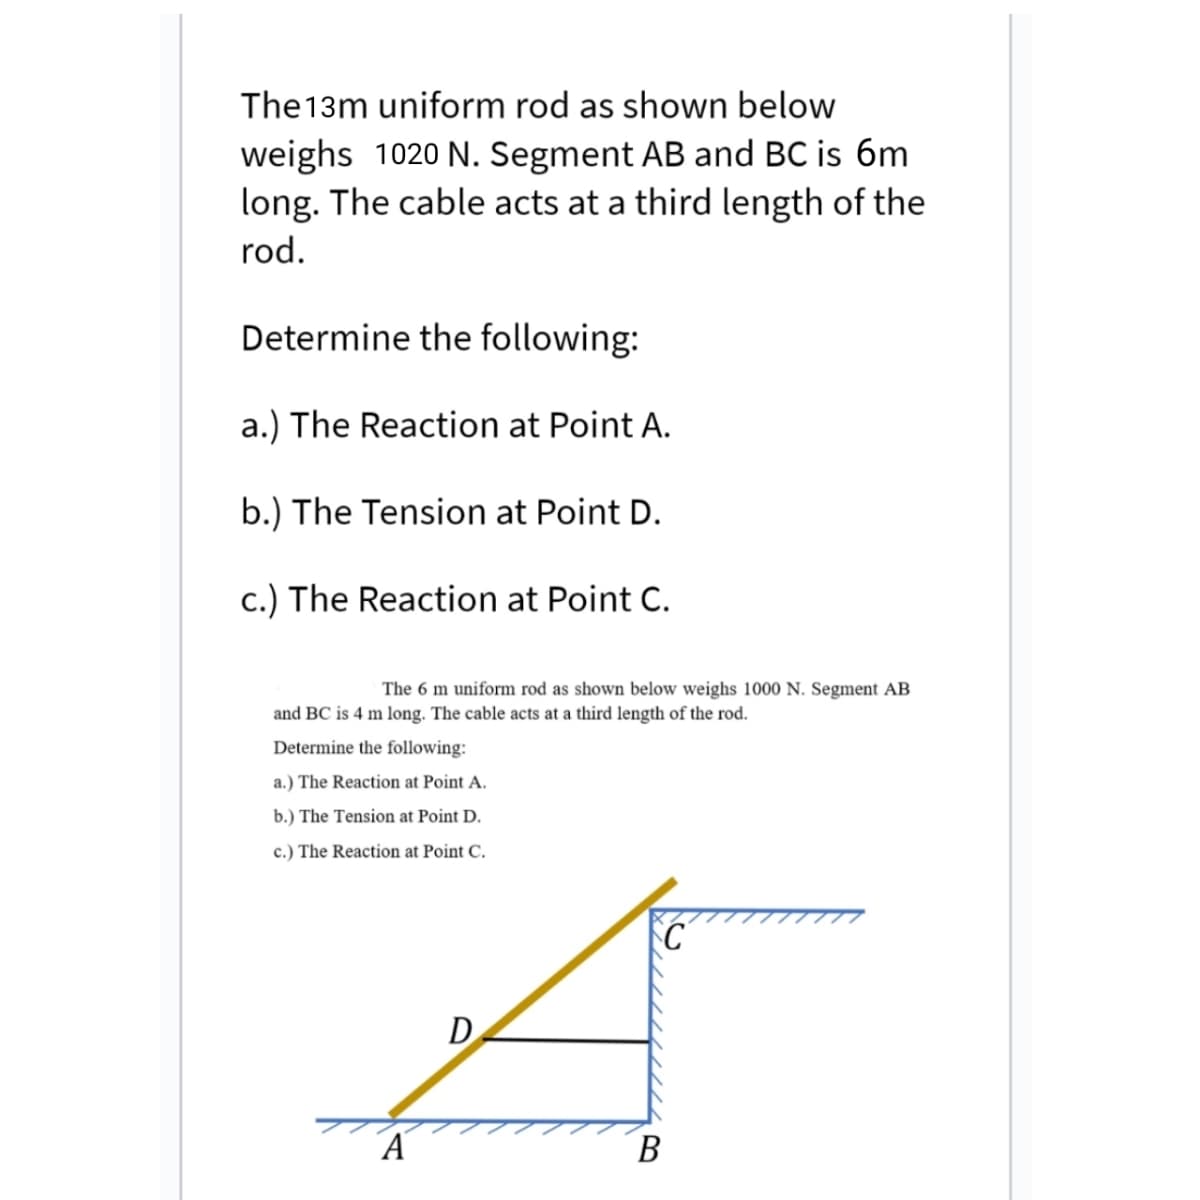 The13m uniform rod as shown below
weighs 1020 N. Segment AB and BC is 6m
long. The cable acts at a third length of the
rod.
Determine the following:
a.) The Reaction at Point A.
b.) The Tension at Point D.
c.) The Reaction at Point C.
The 6 m uniform rod as shown below weighs 1000 N. Segment AB
and BC is 4 m long. The cable acts at a third length of the rod.
Determine the following:
a.) The Reaction at Point A.
b.) The Tension at Point D.
c.) The Reaction at Point C.
D
В
